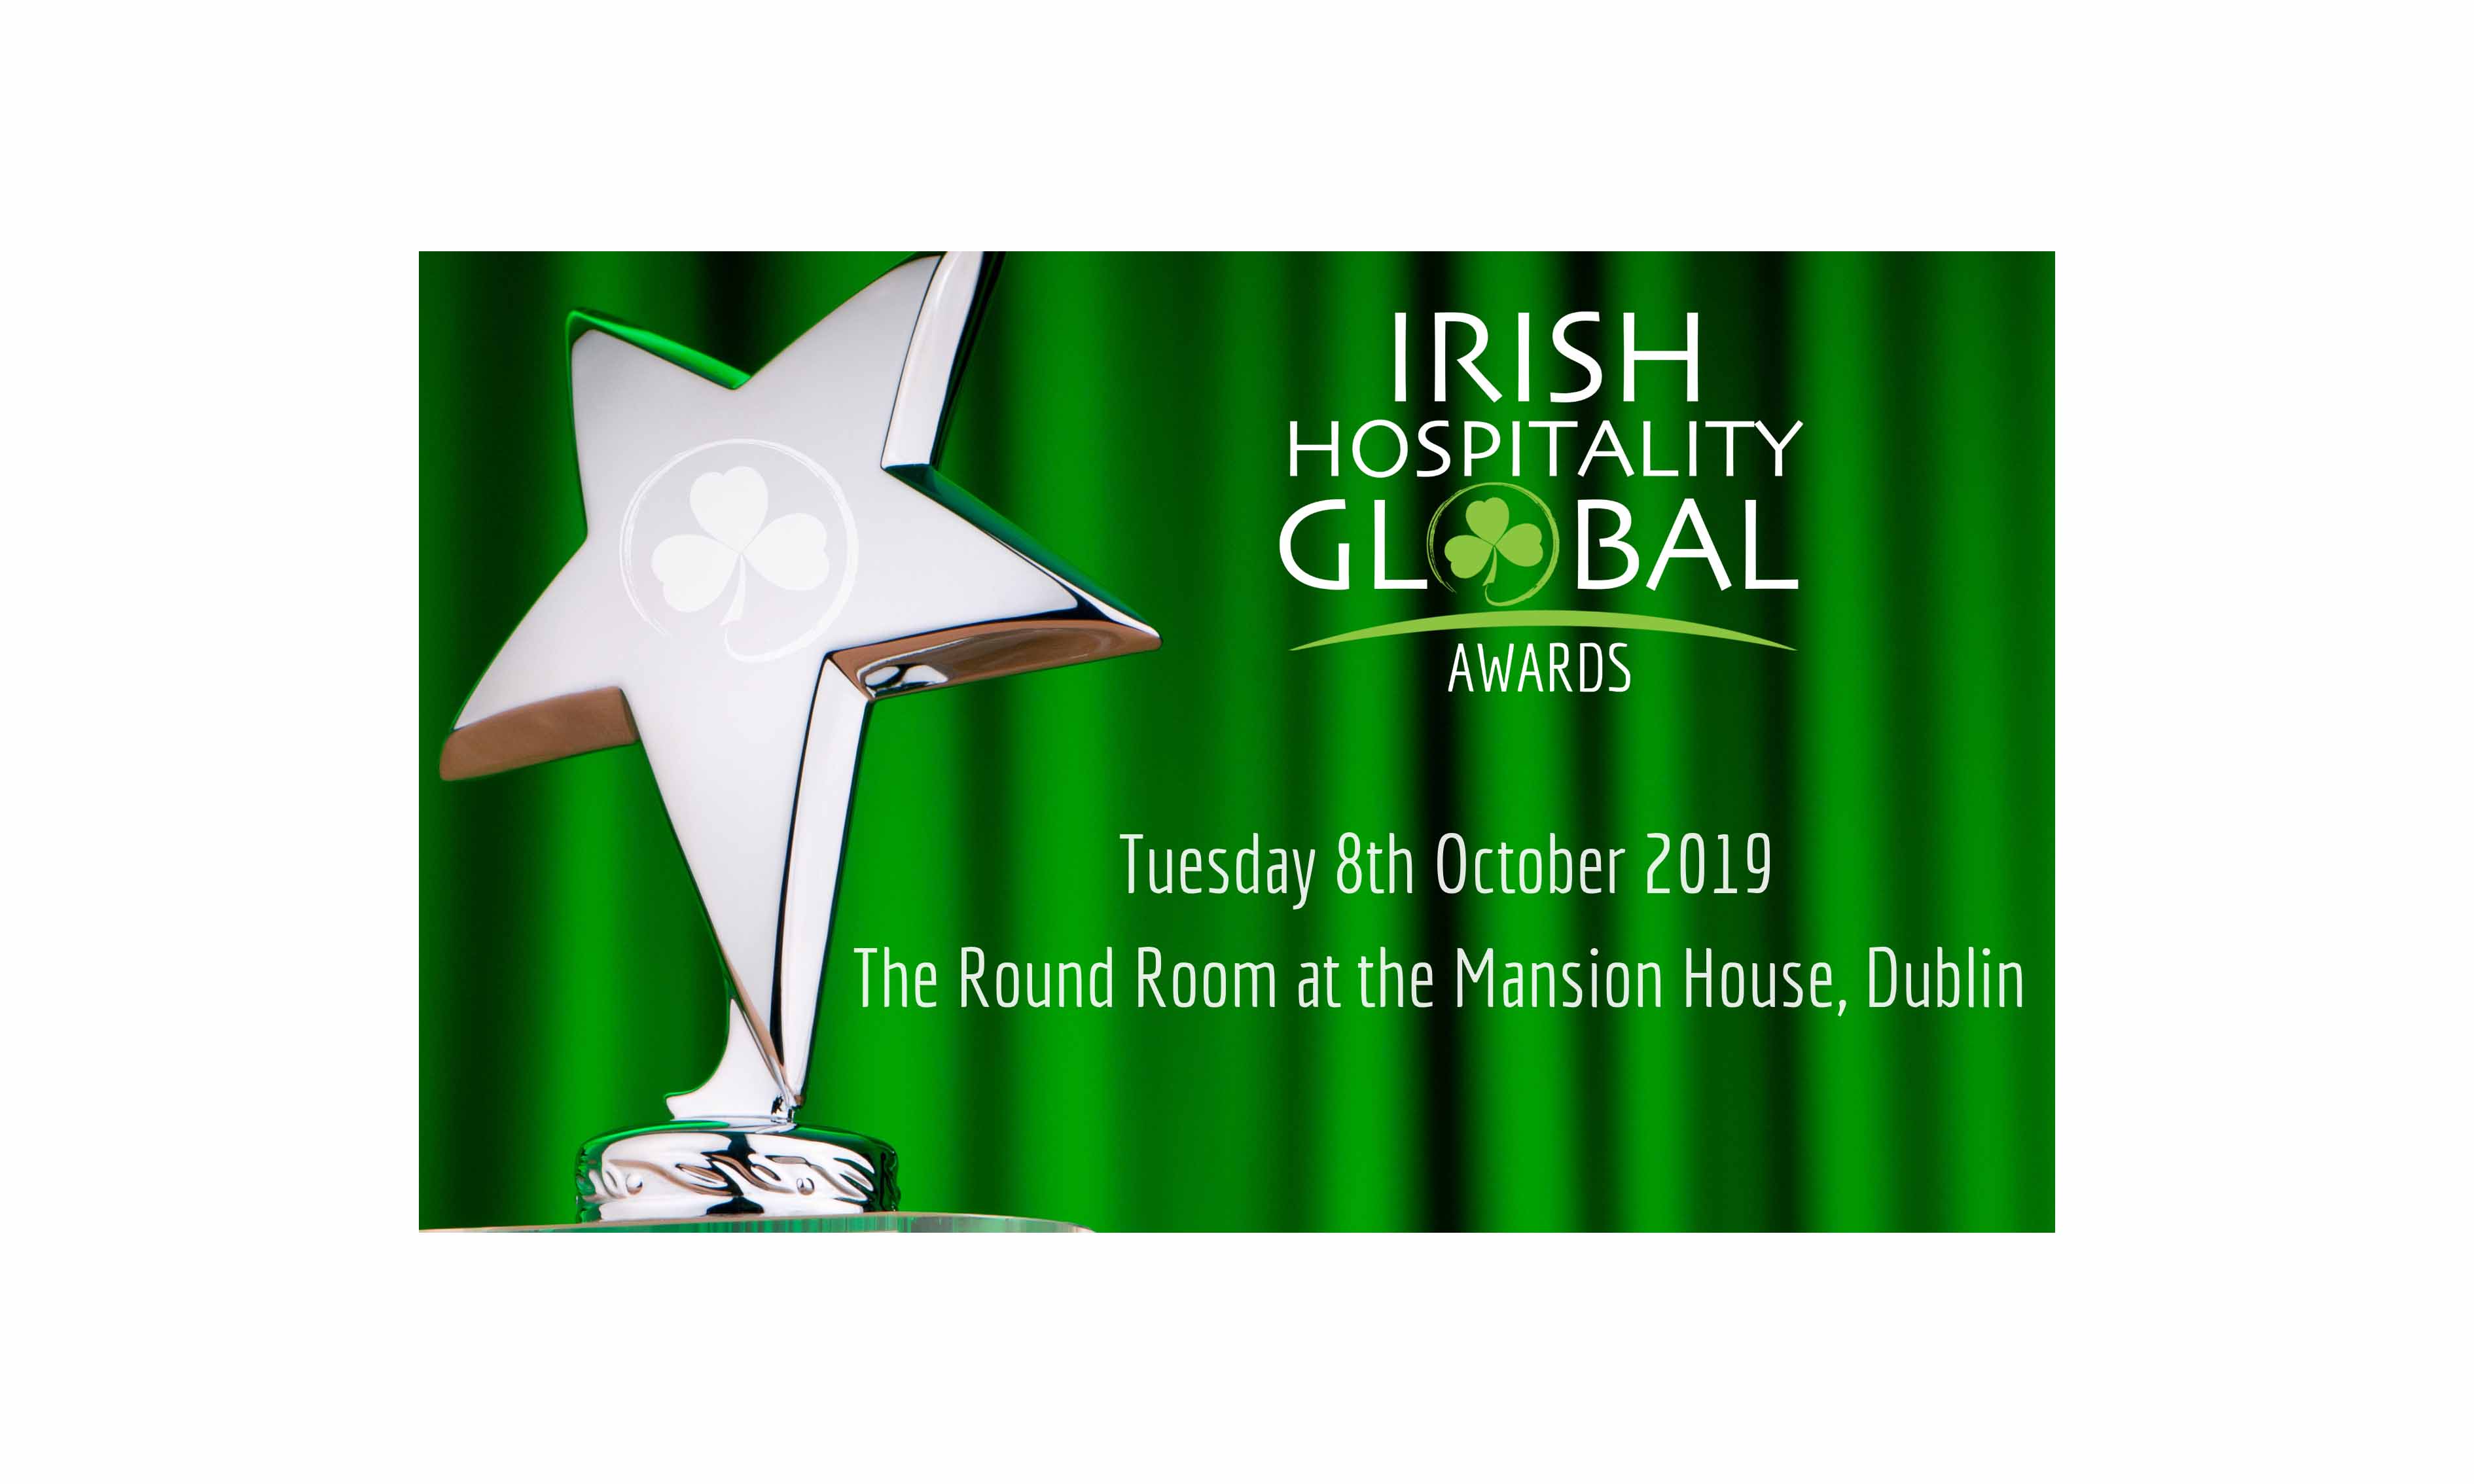 The 2019 annual awards programme follows an online voting campaign which received over 20,000 votes from customers of Irish pubs around the world.